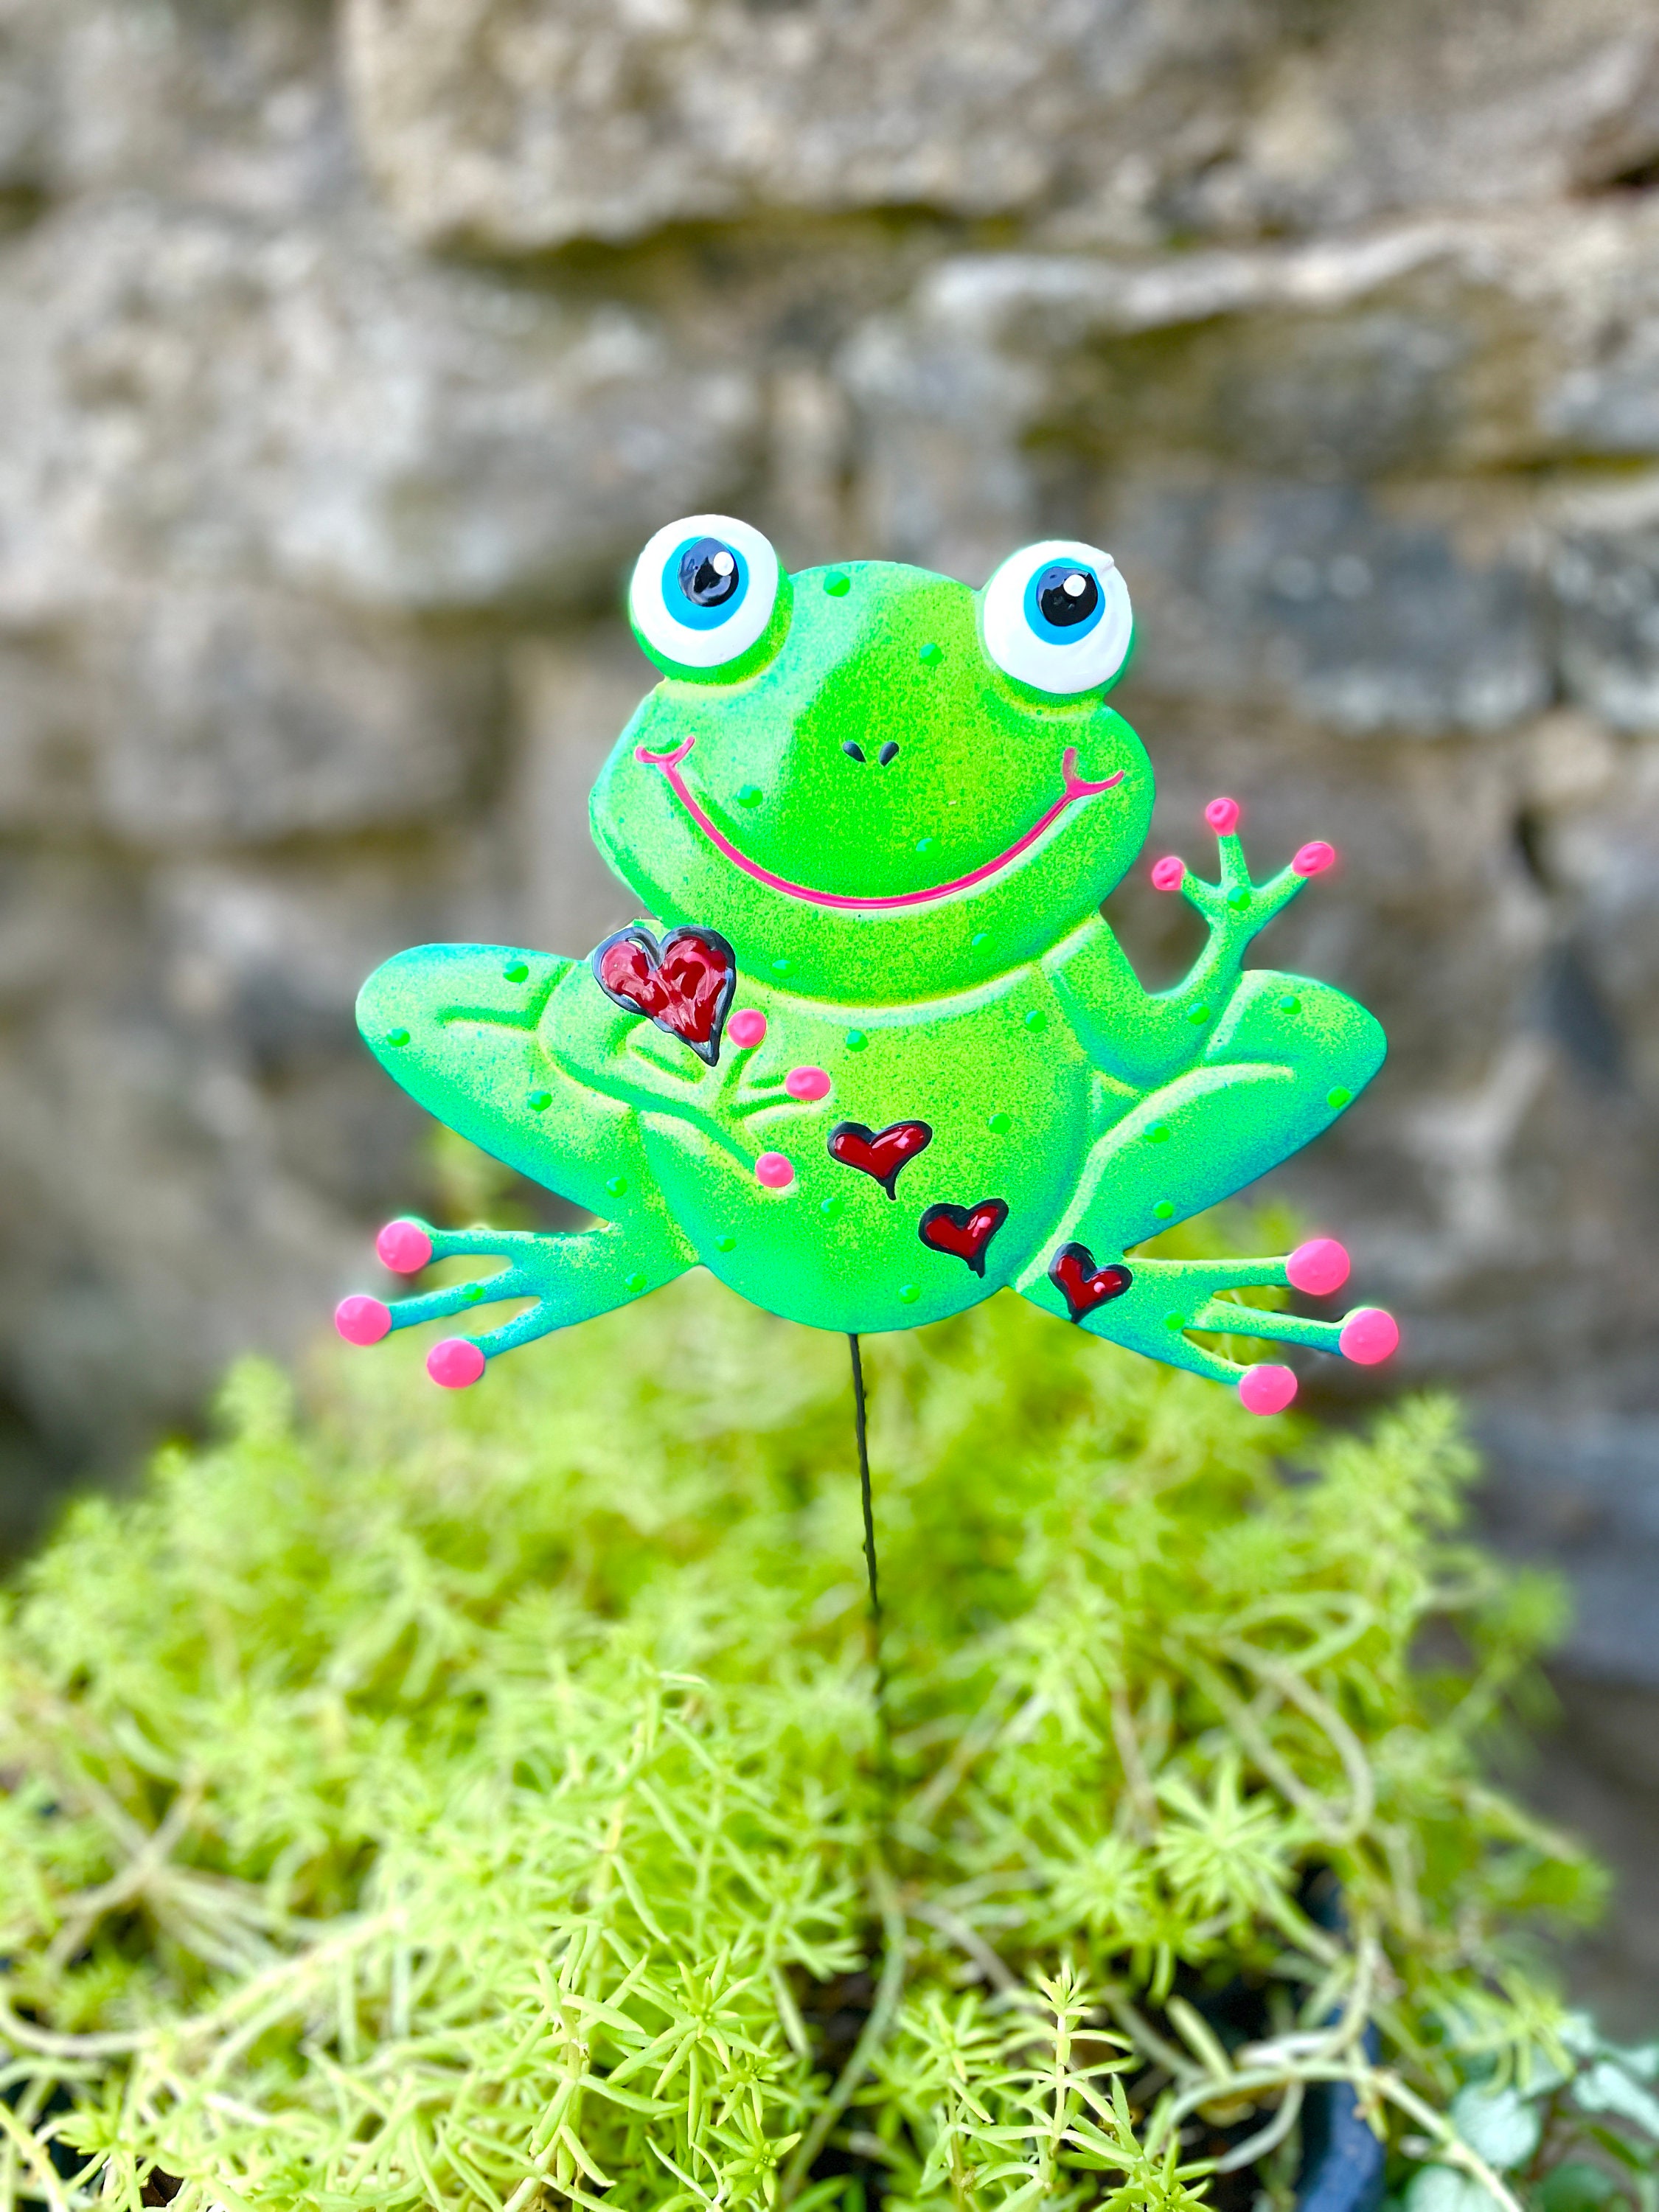 Happy Frog with Hearts Garden Stake,Frog Garden Art,Potted plants